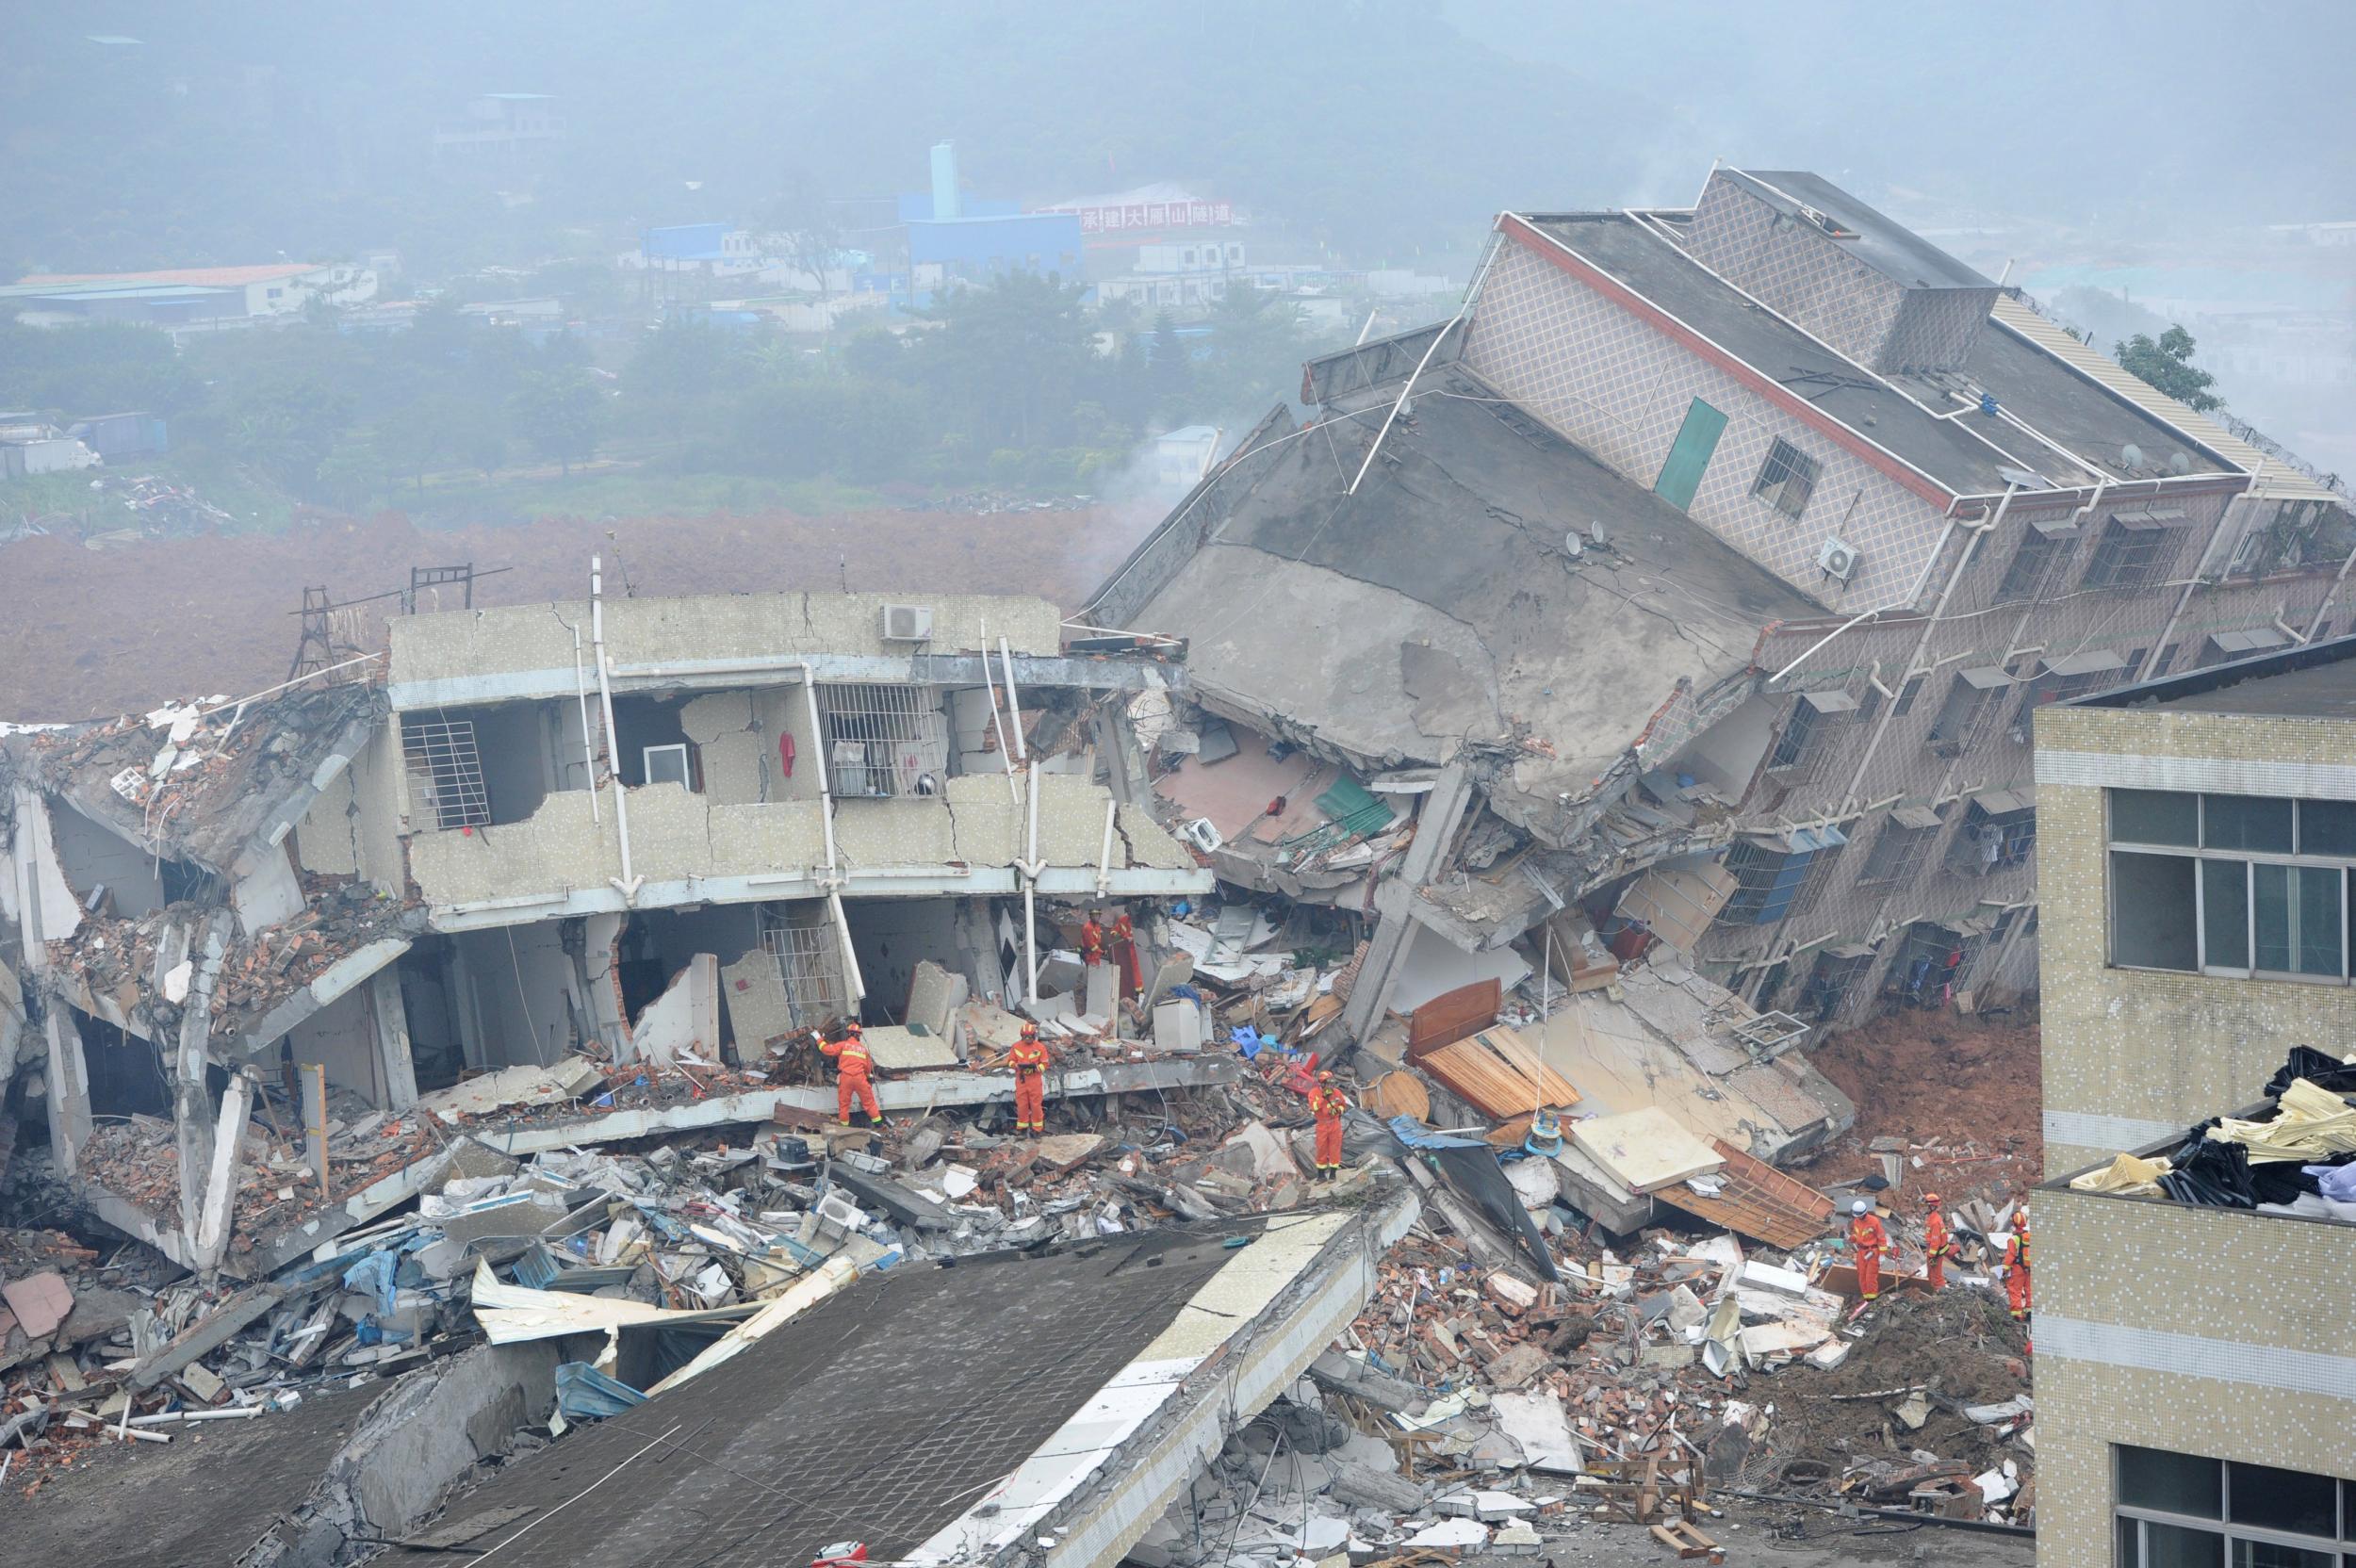 Hundreds of rescuers are sifting through rubble looking for survivors